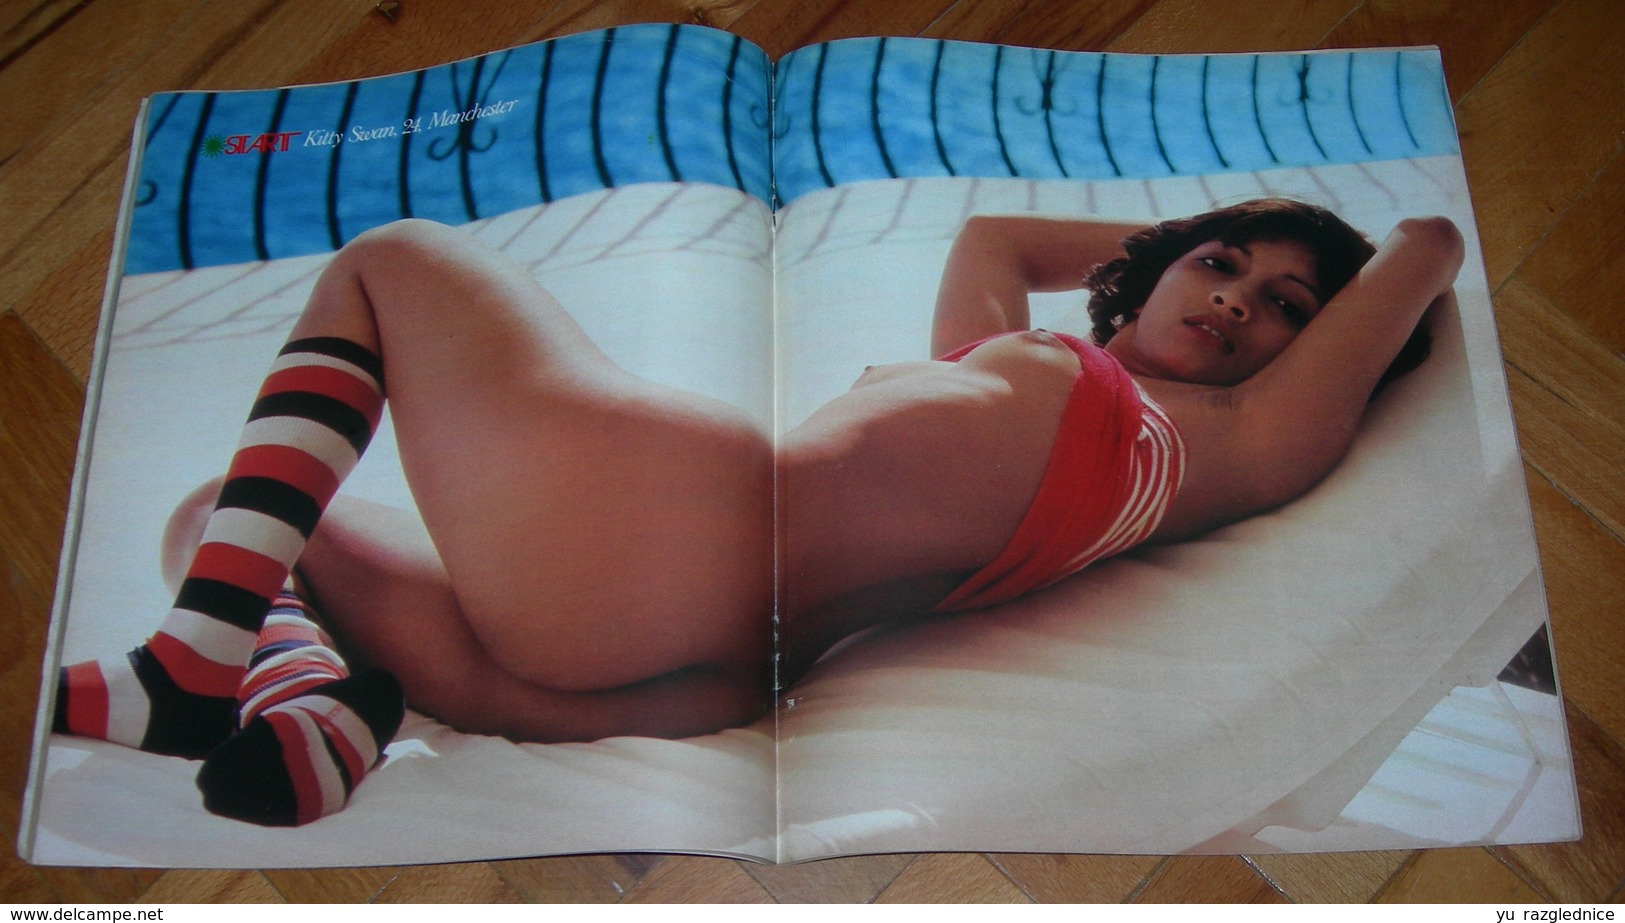 Kitty Swan Model From Manchester - START Yugoslavian From April 1977 ULTRA RARE - Magazines